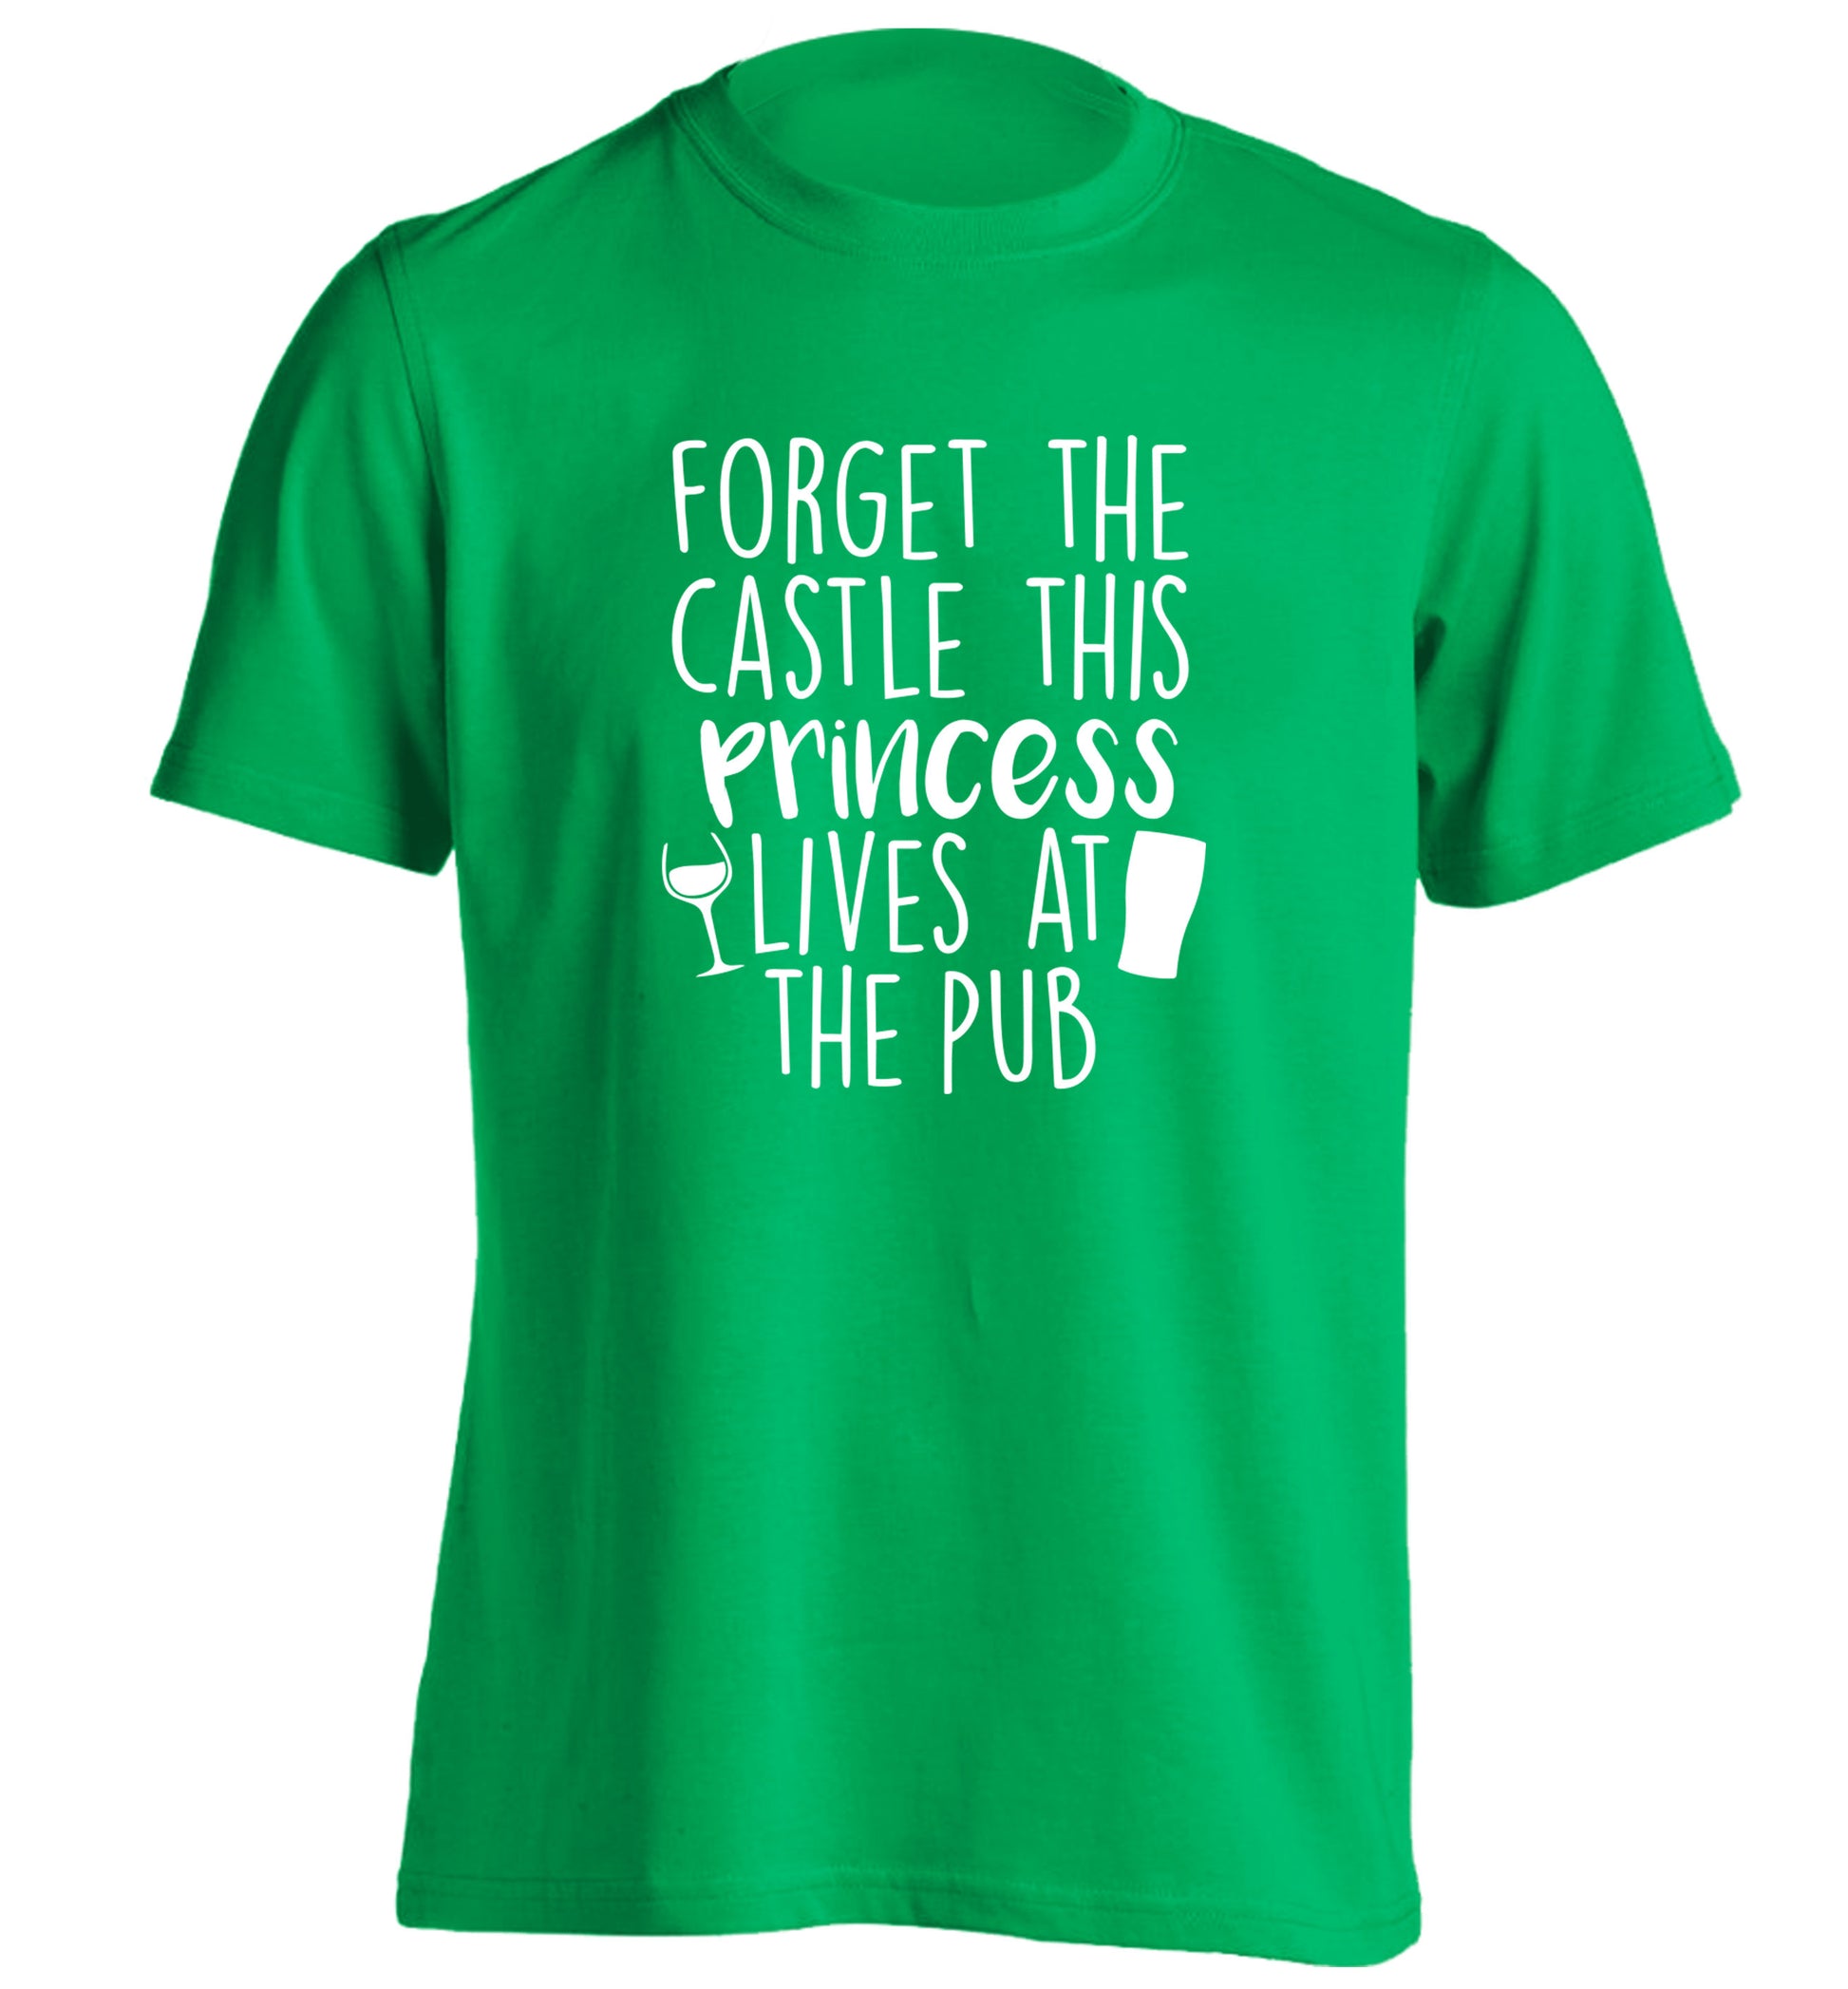 Forget the castle this princess lives at the pub adults unisex green Tshirt 2XL